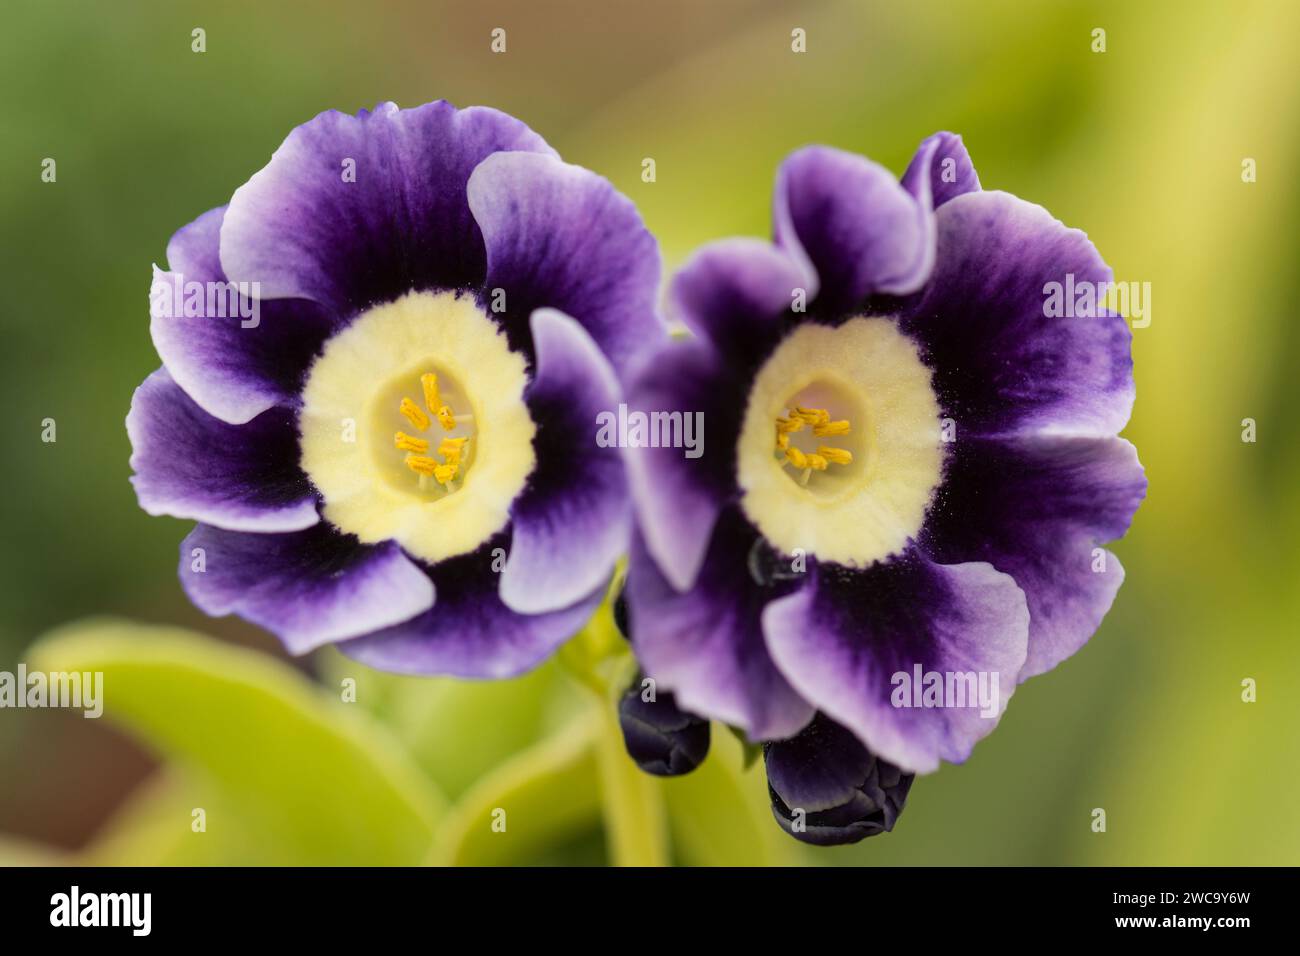 Primula auricula 'Averil hunter', two purple flowers with buds, April Stock Photo